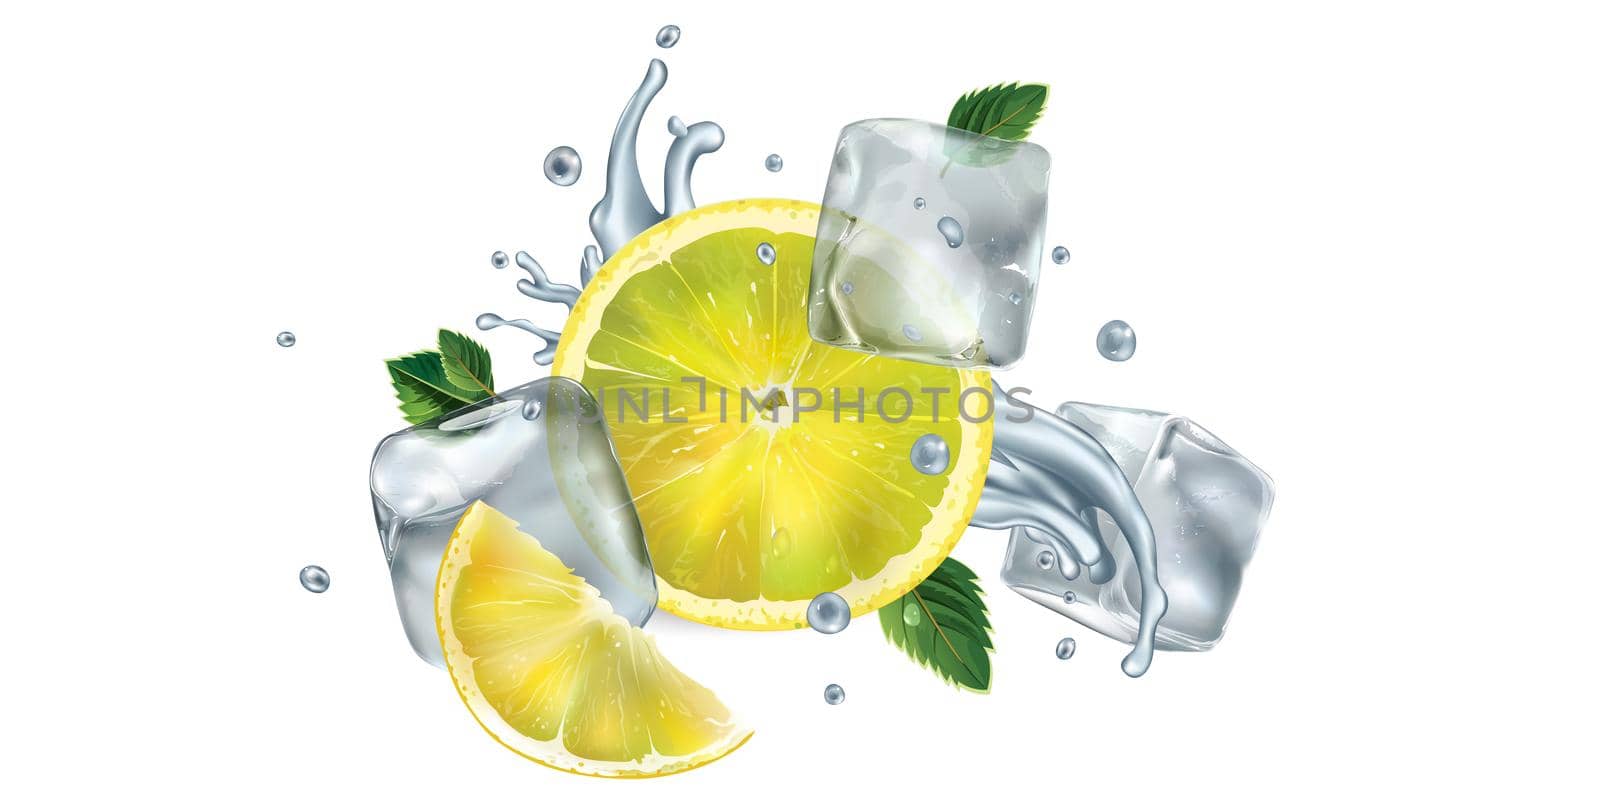 Sliced lemon, mint leaves and ice cubes with water splash by ConceptCafe